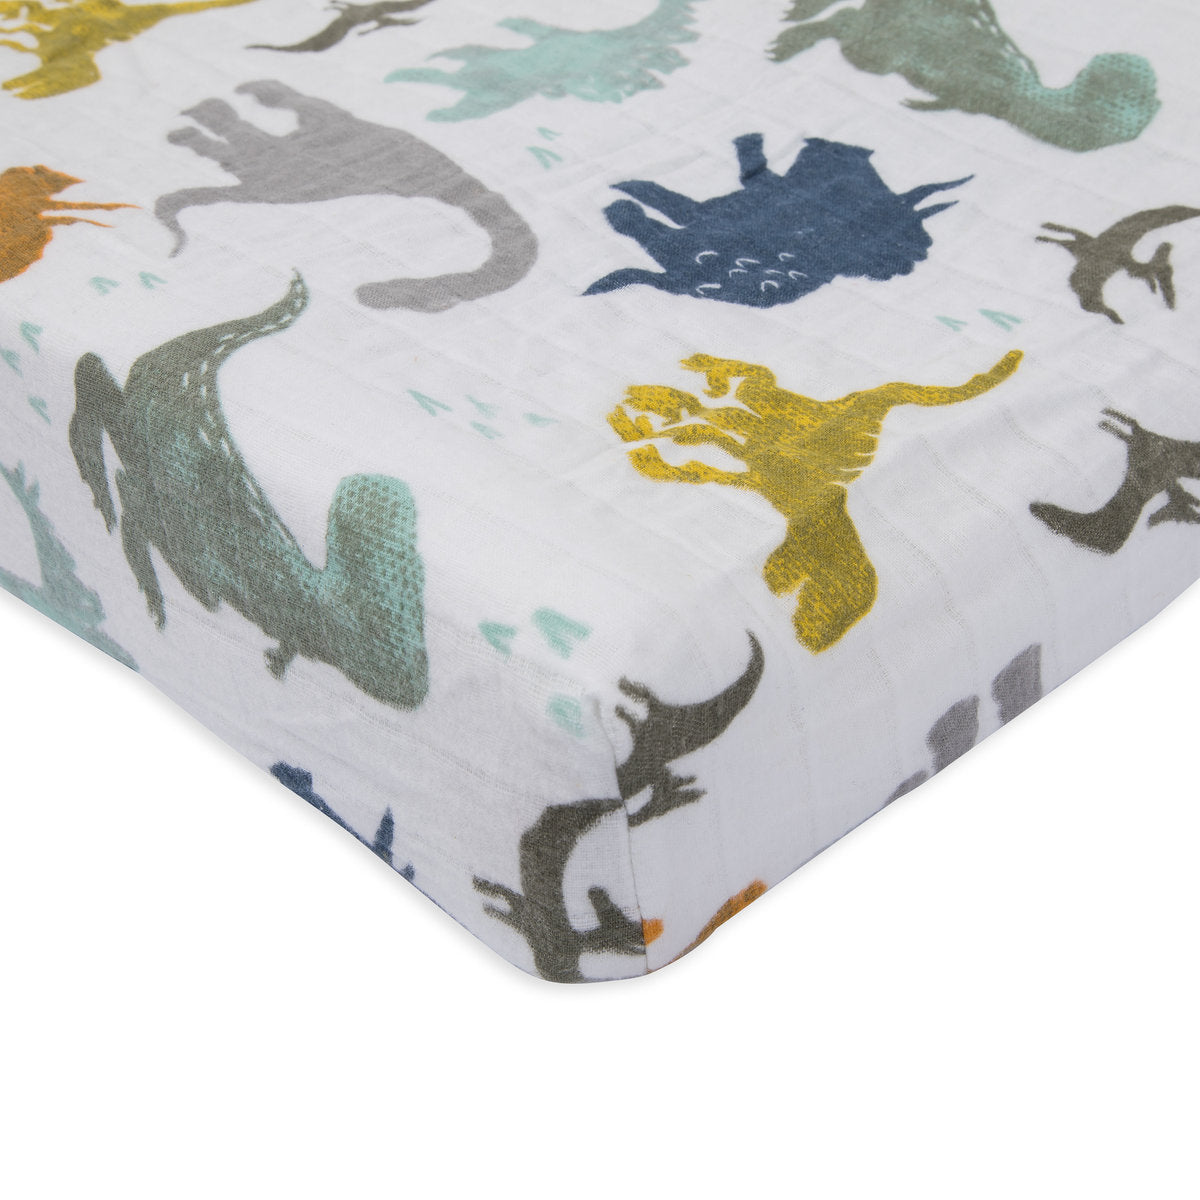 Cotton Muslin Change Pad Cover Dino Friends